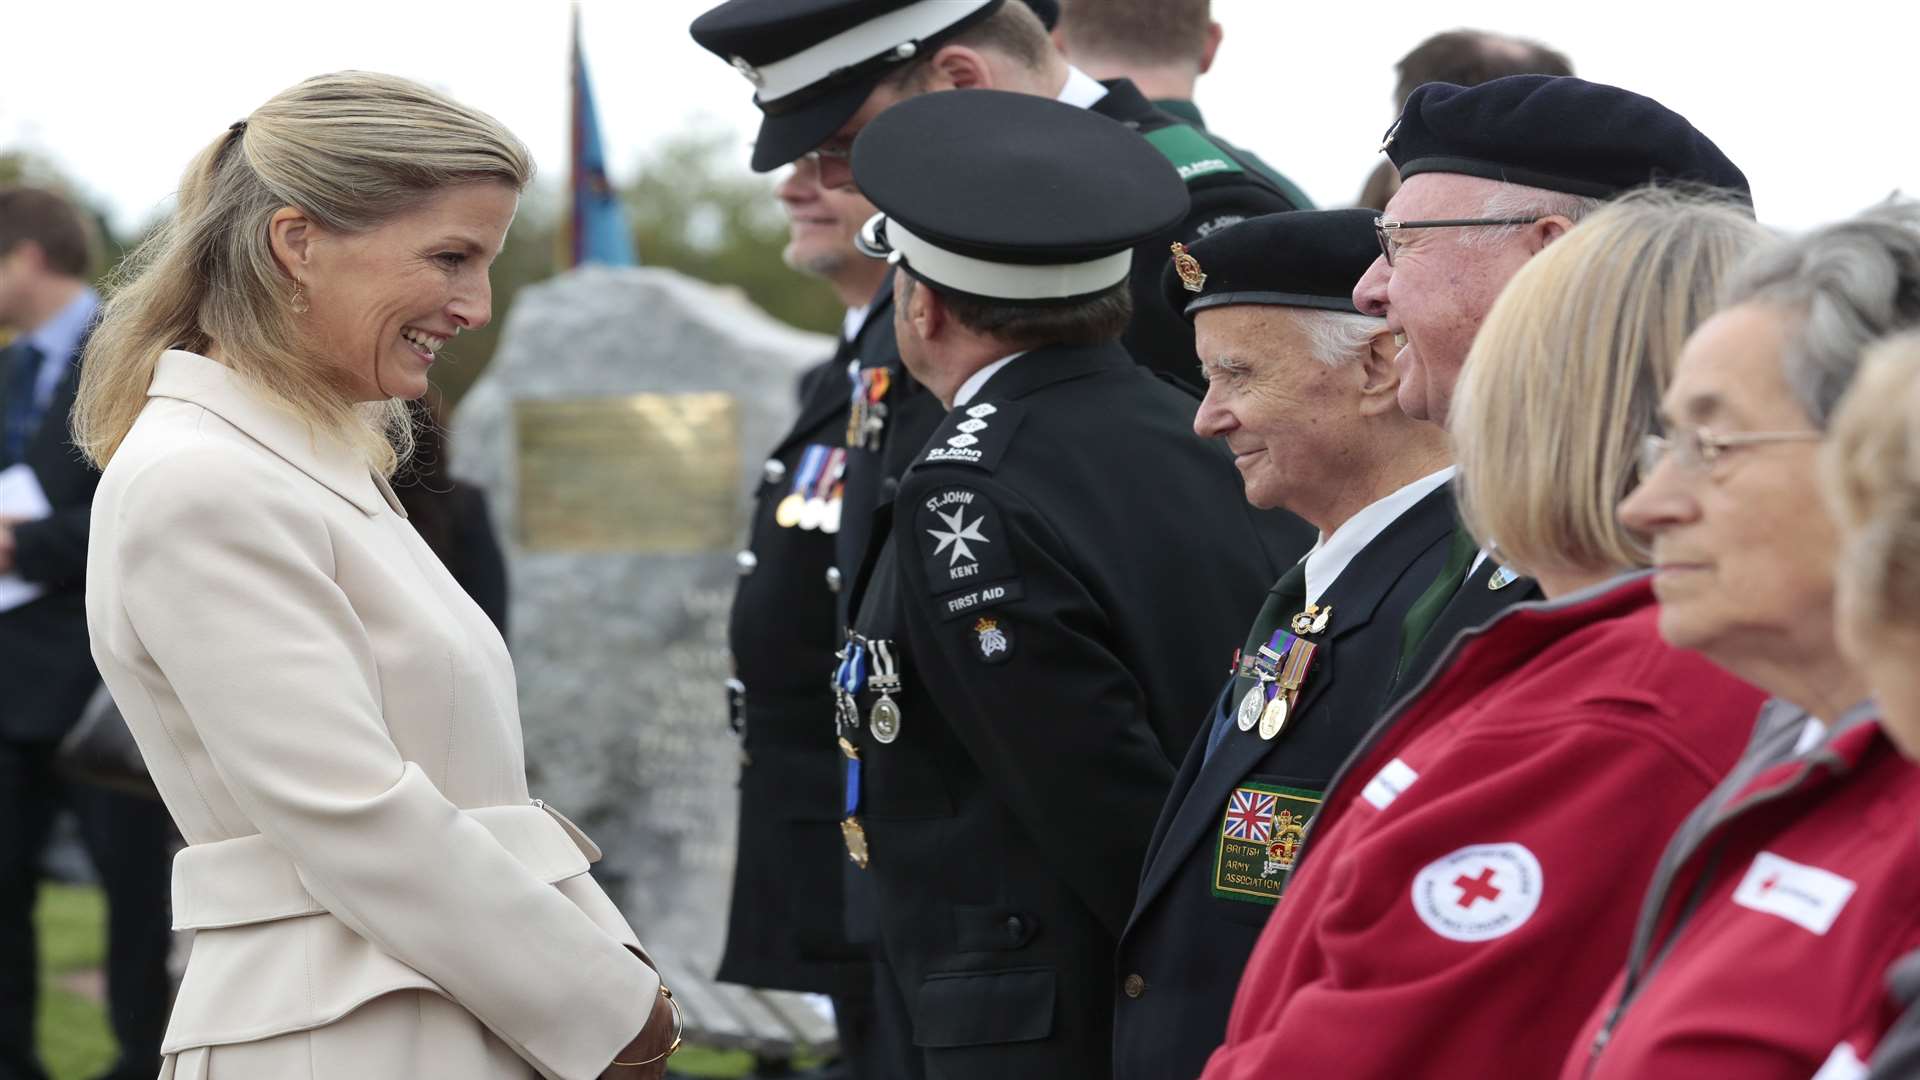 The Countess of Wessex met members of the emergency services